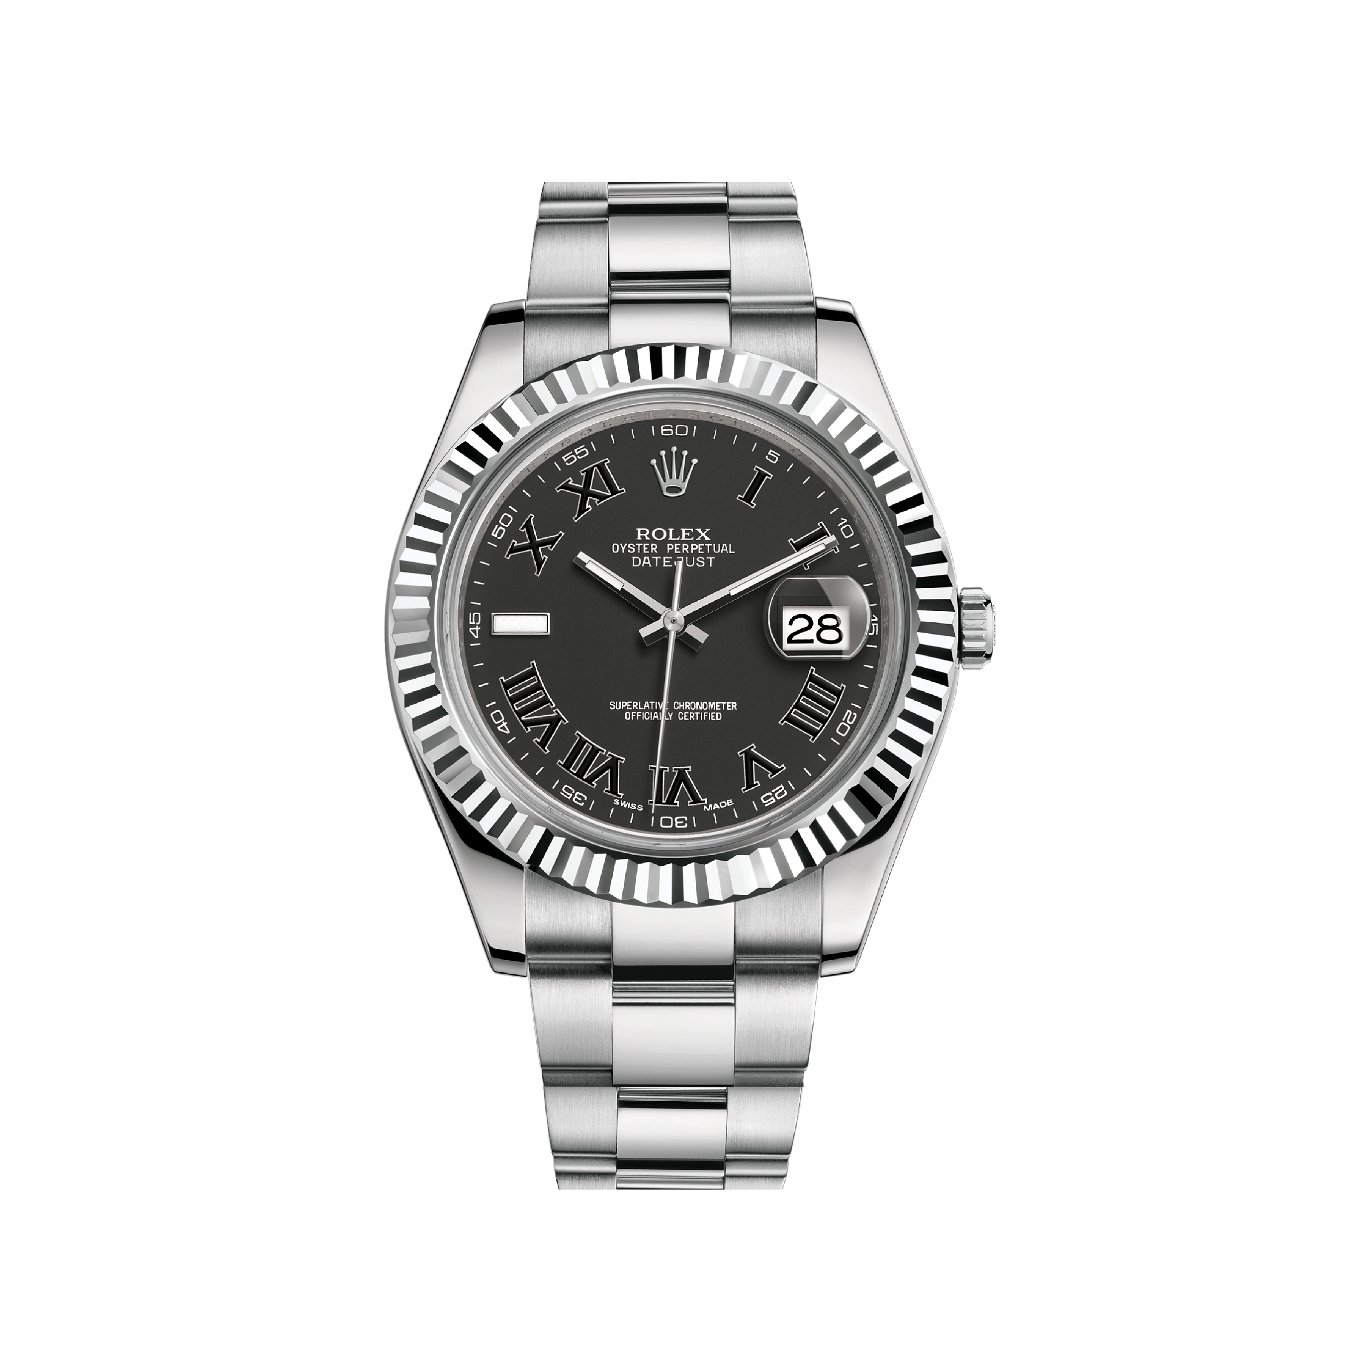 Datejust II 116334 White Gold & Stainless Steel Watch (Black)